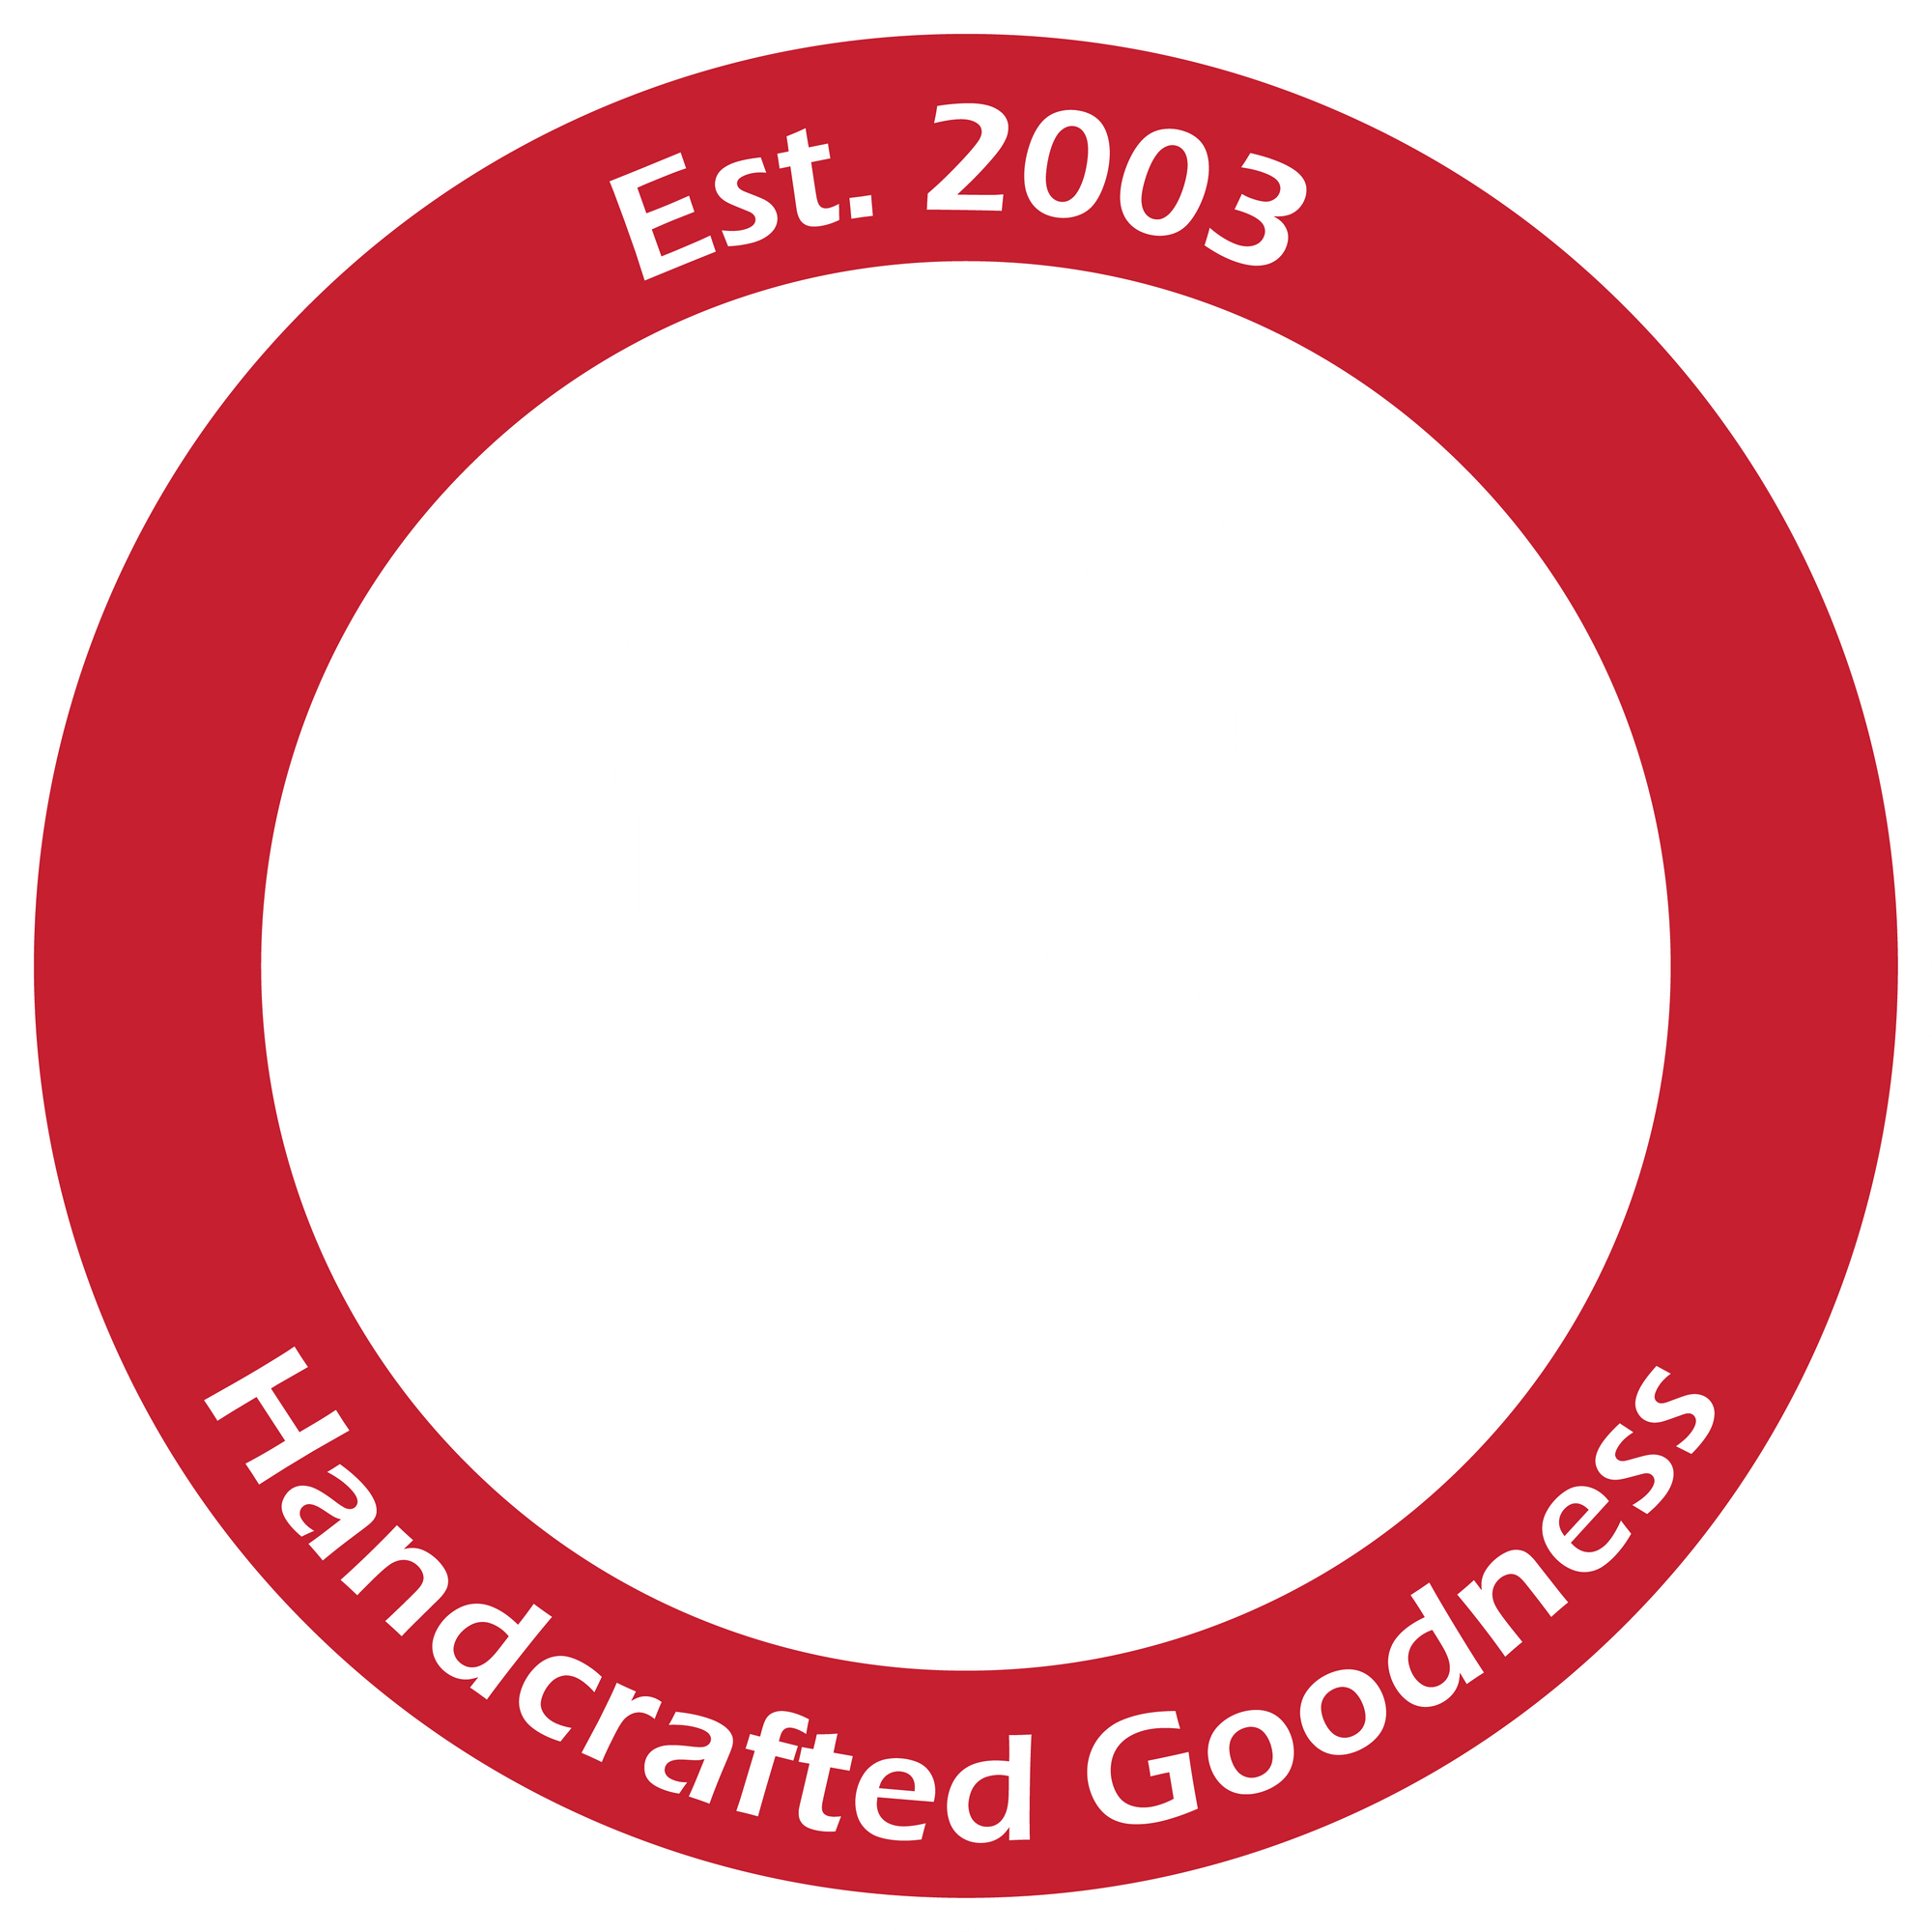 CSTsweets